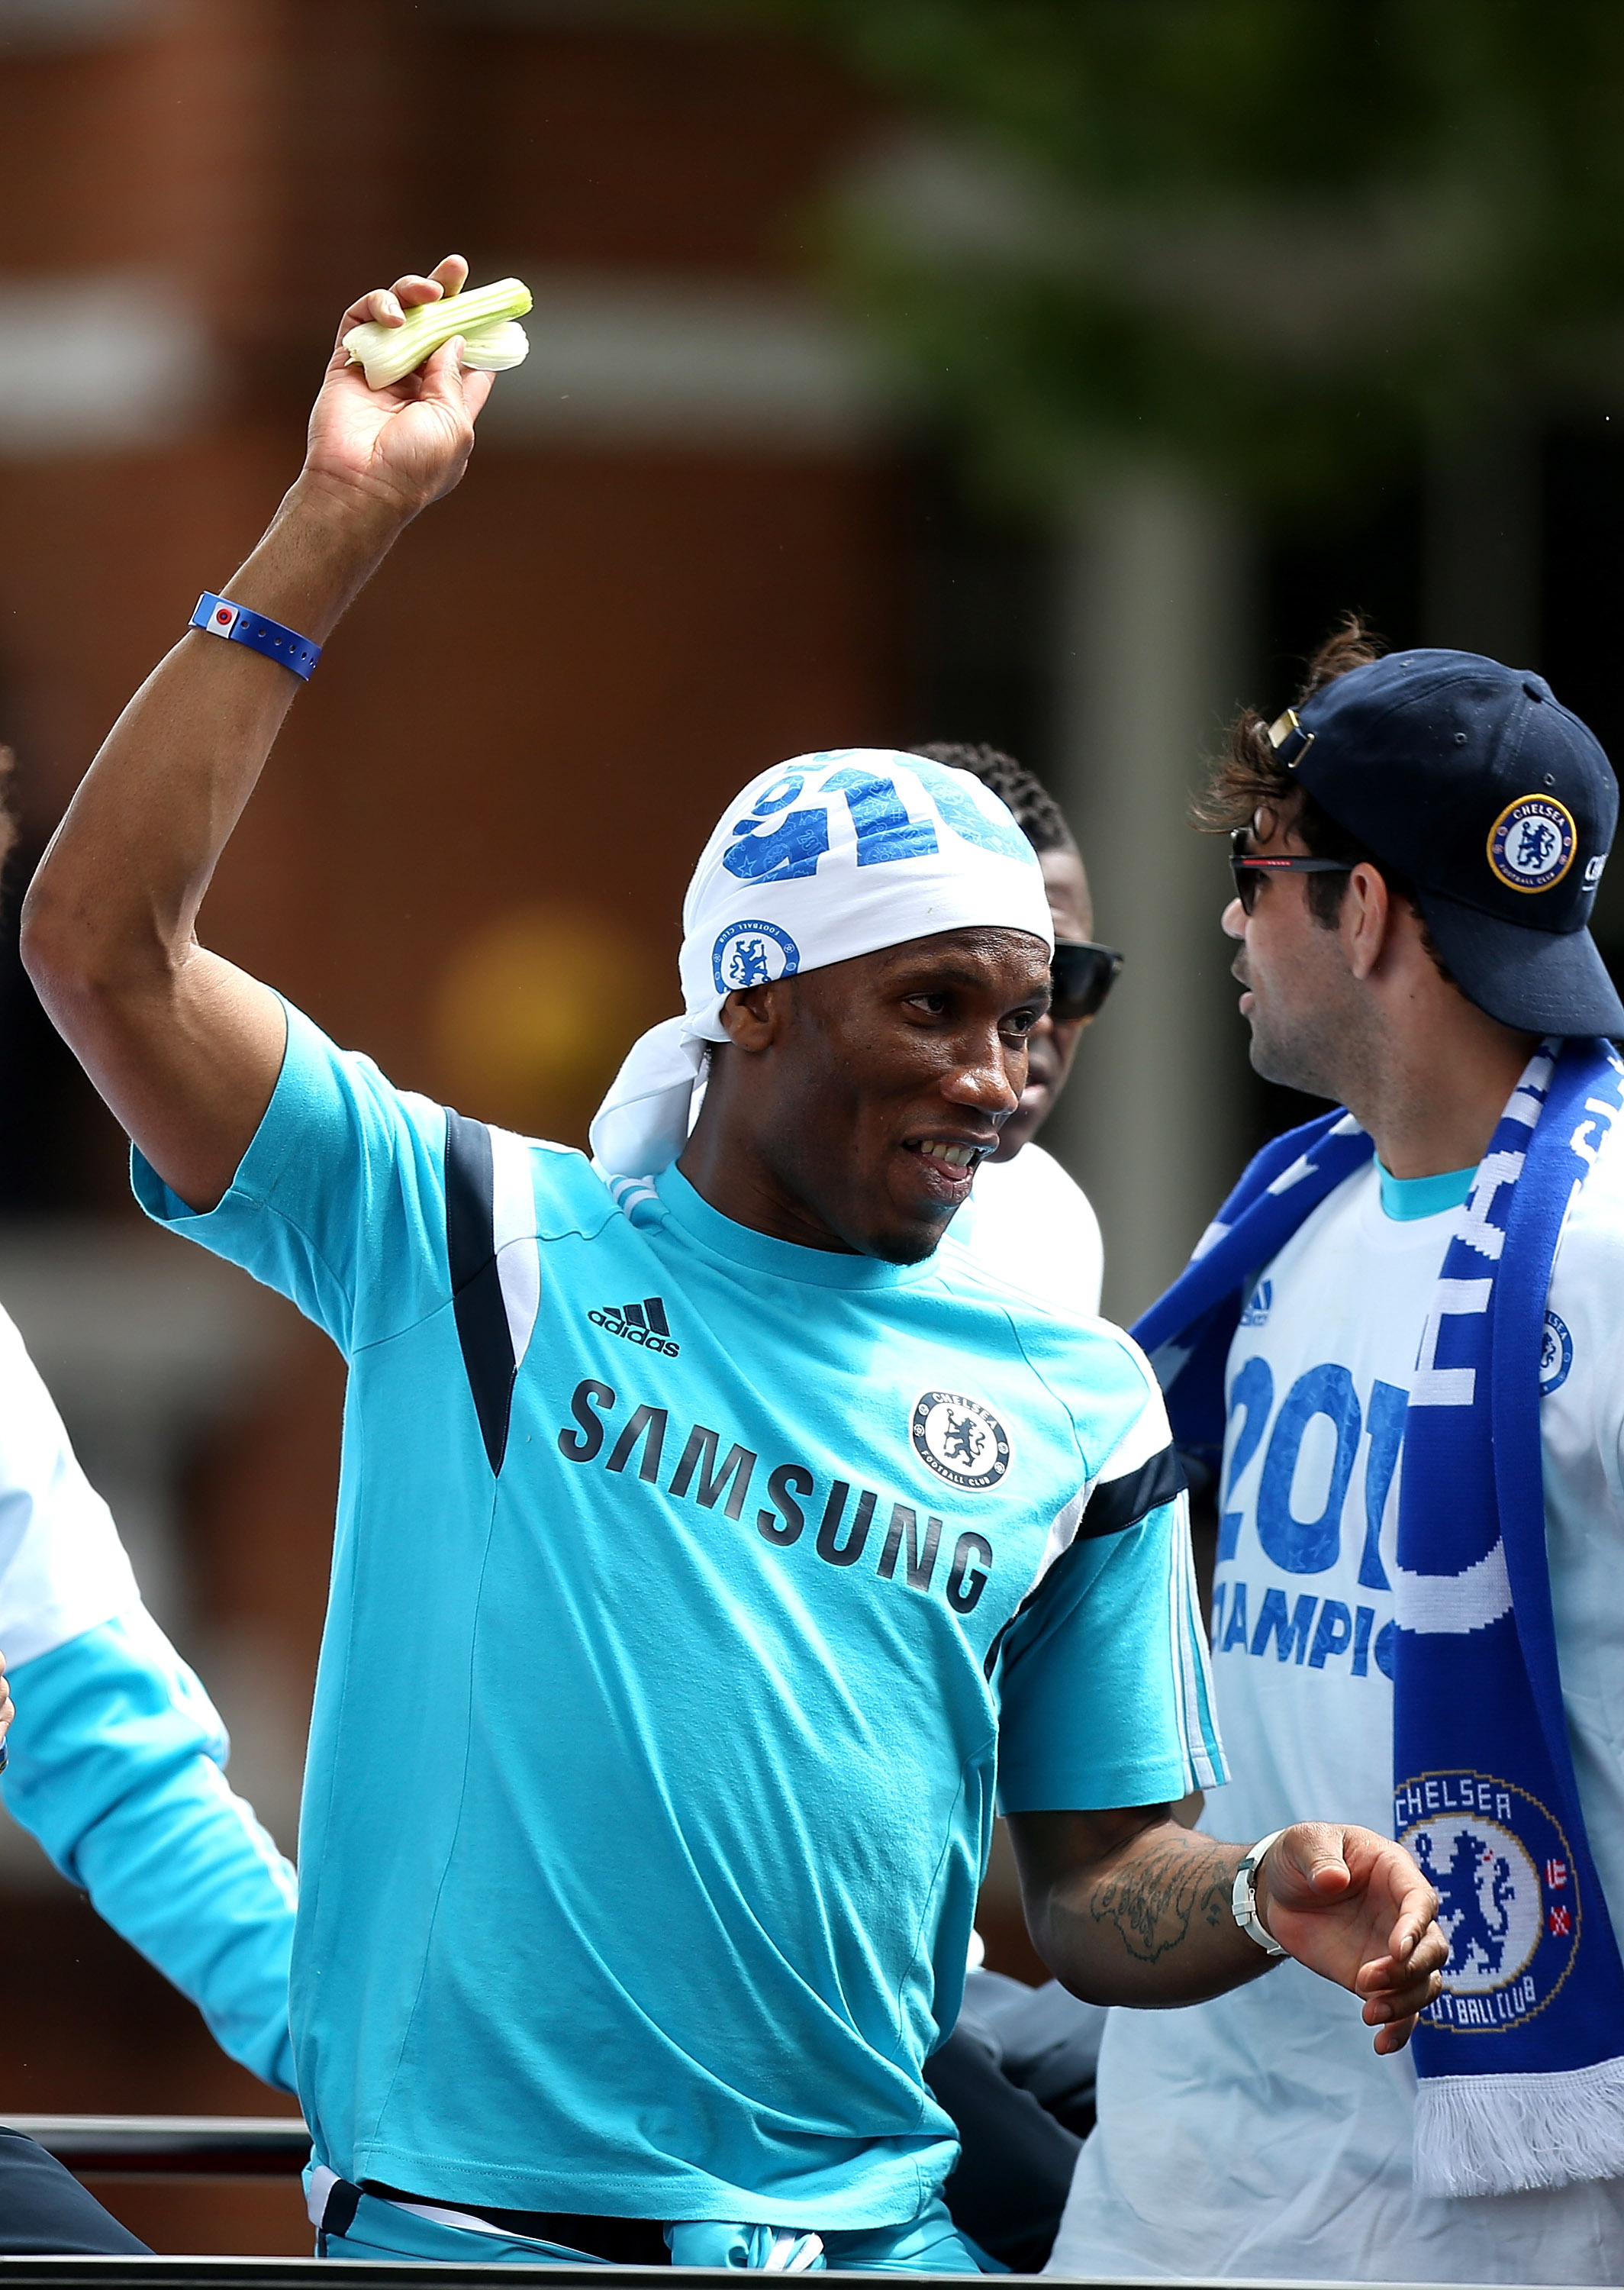 Chelsea legend Didier Drogba hilariously lobbed the green vegetable back at fans from an open-tip bus